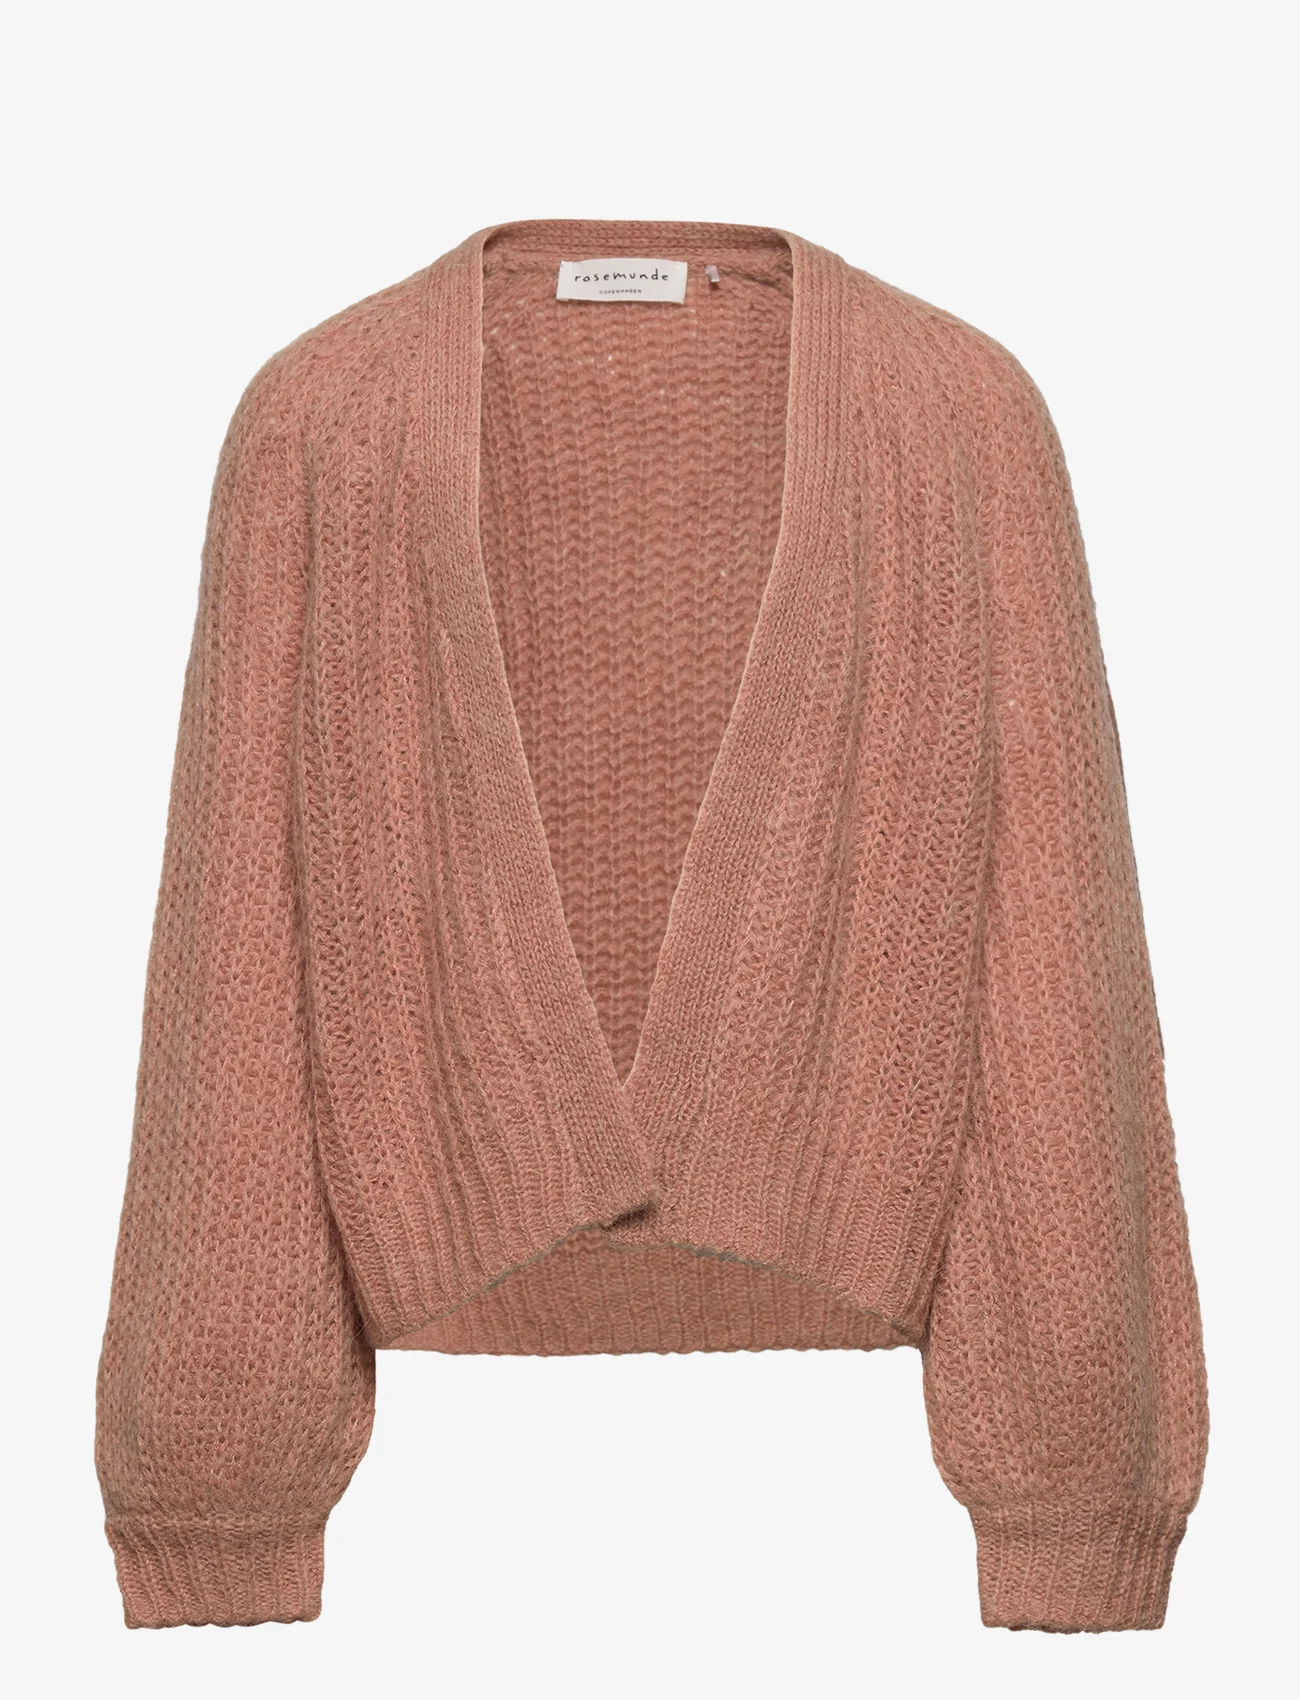 Rosemunde Kids - Partly recycle cardigan - burnt coral - 0